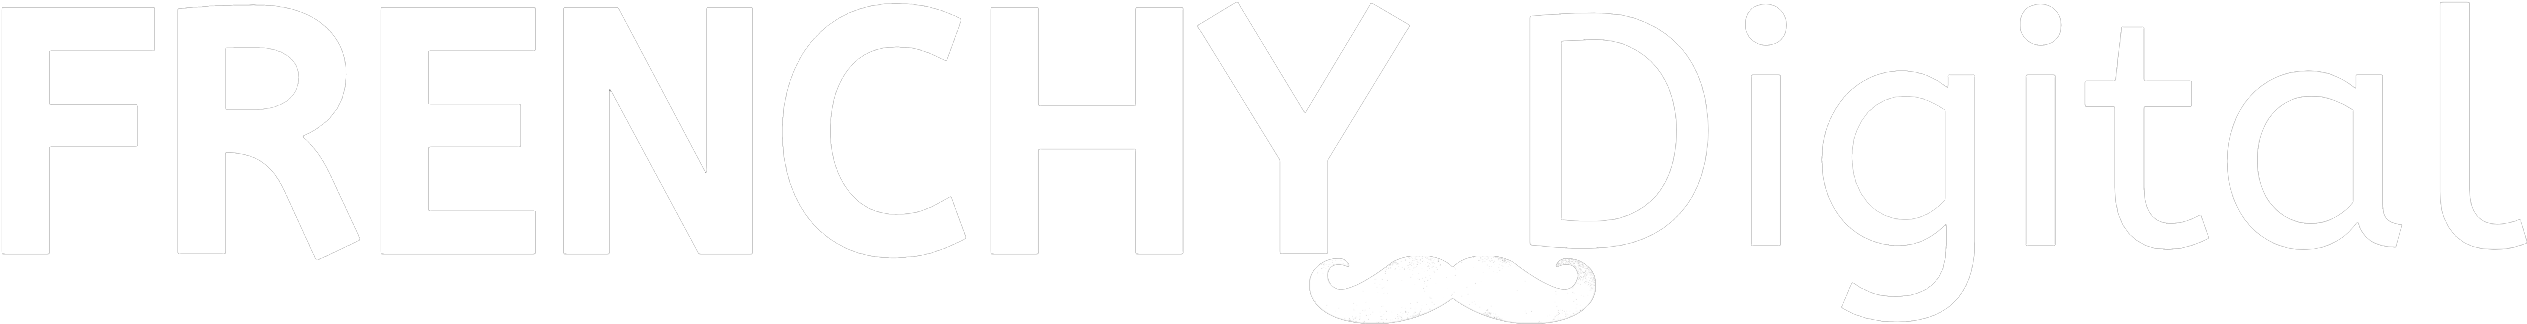 Frenchy Digital Logo With Moustache PNG